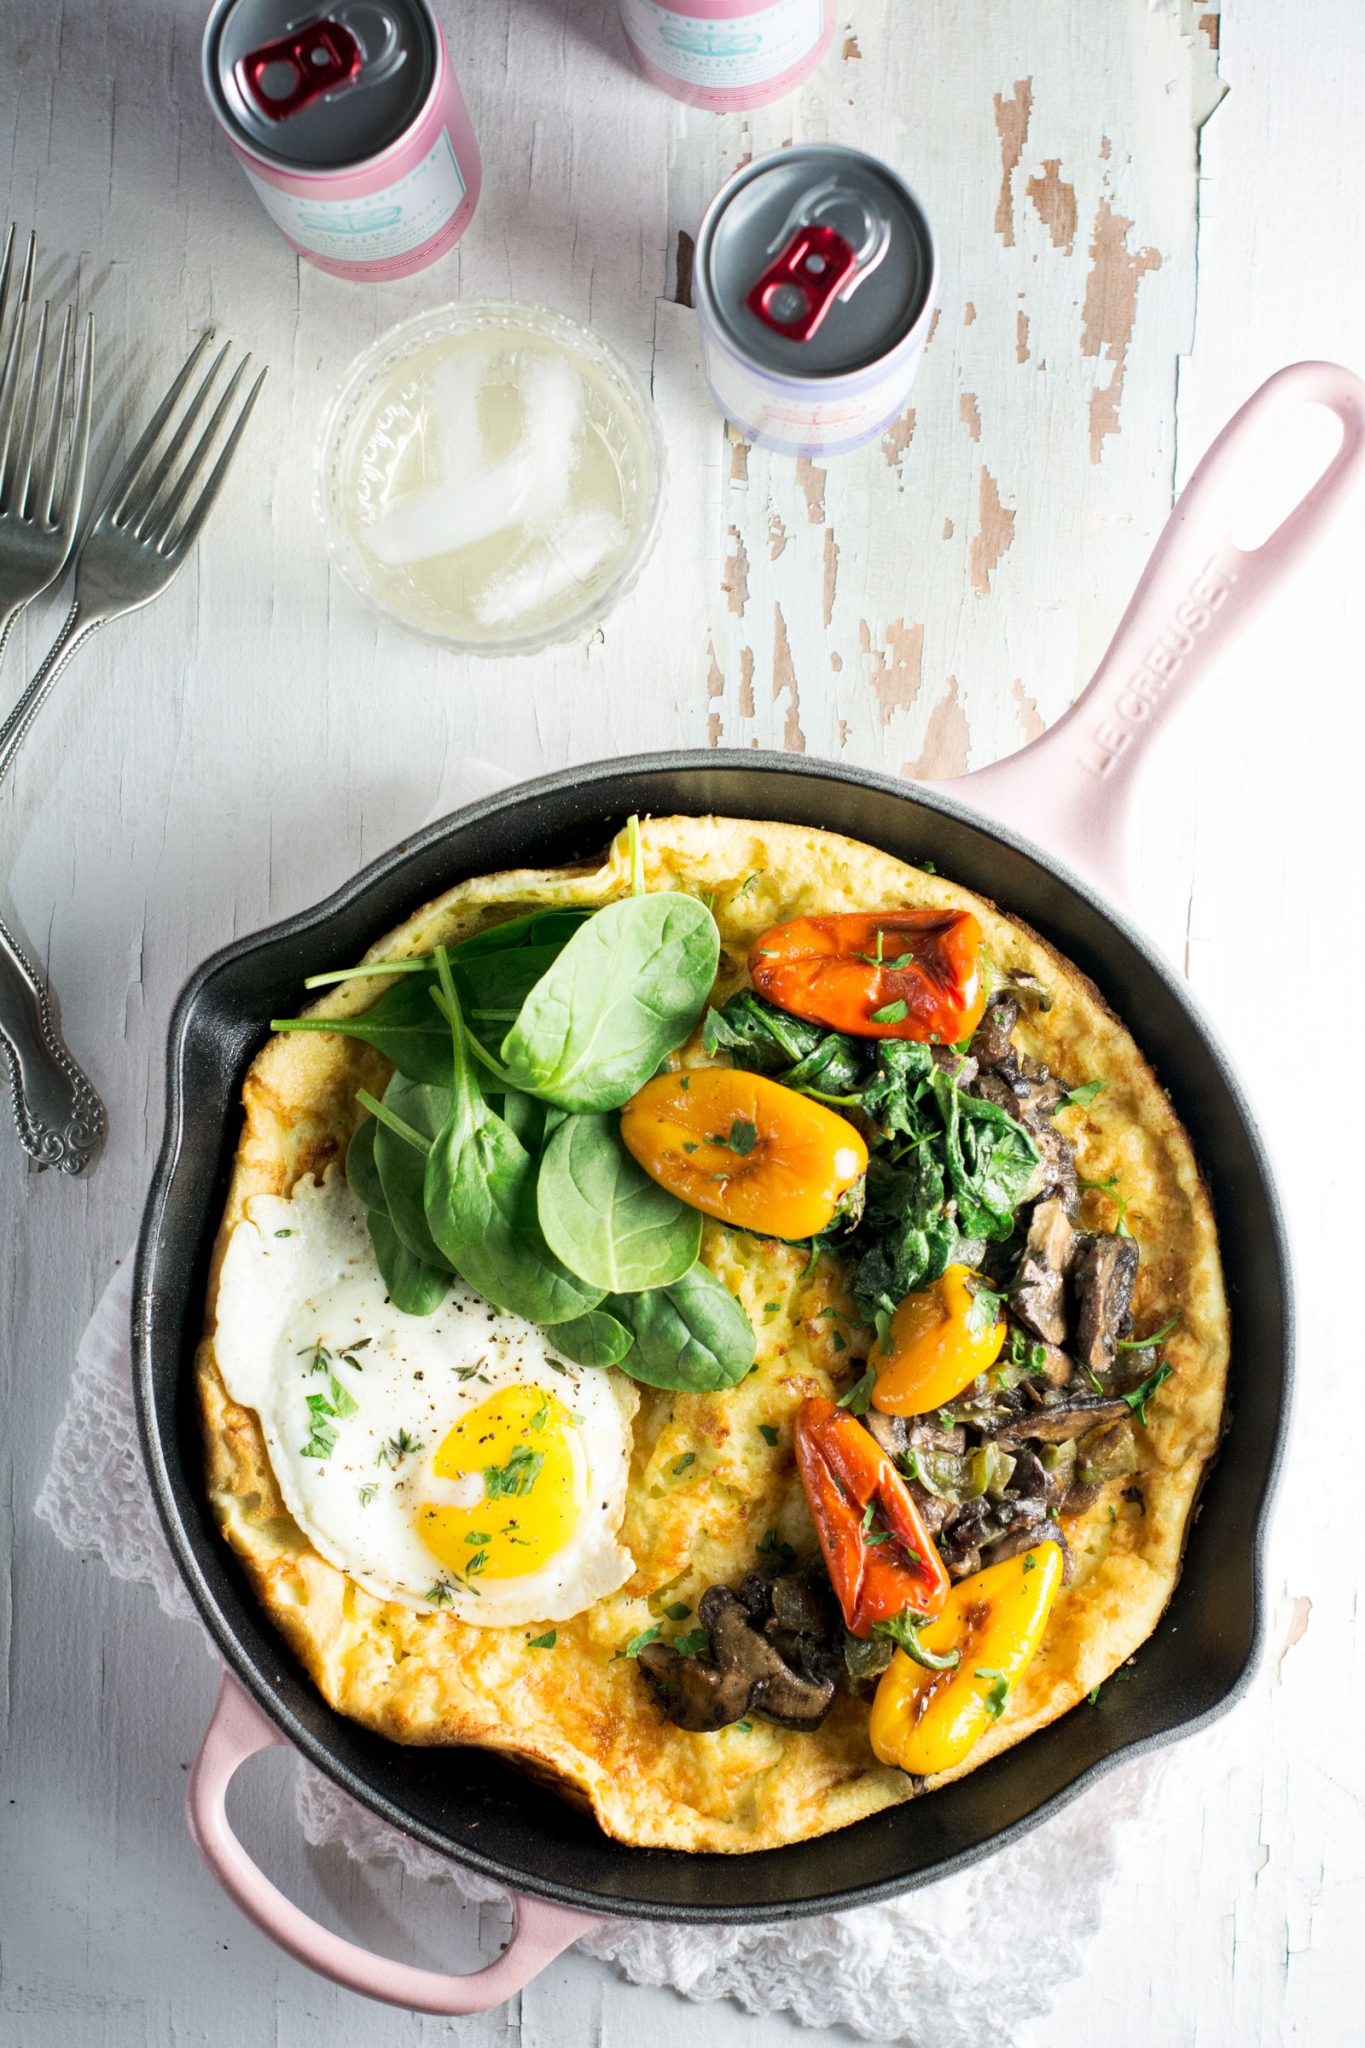 Savory Dutch Baby being served along with @enjoyPampelonne and made in my favorite skillet from @LeCreuset. Get the recipe at Little Figgy Food. #ad #LeCreusetLove #EnjoyPampelonne